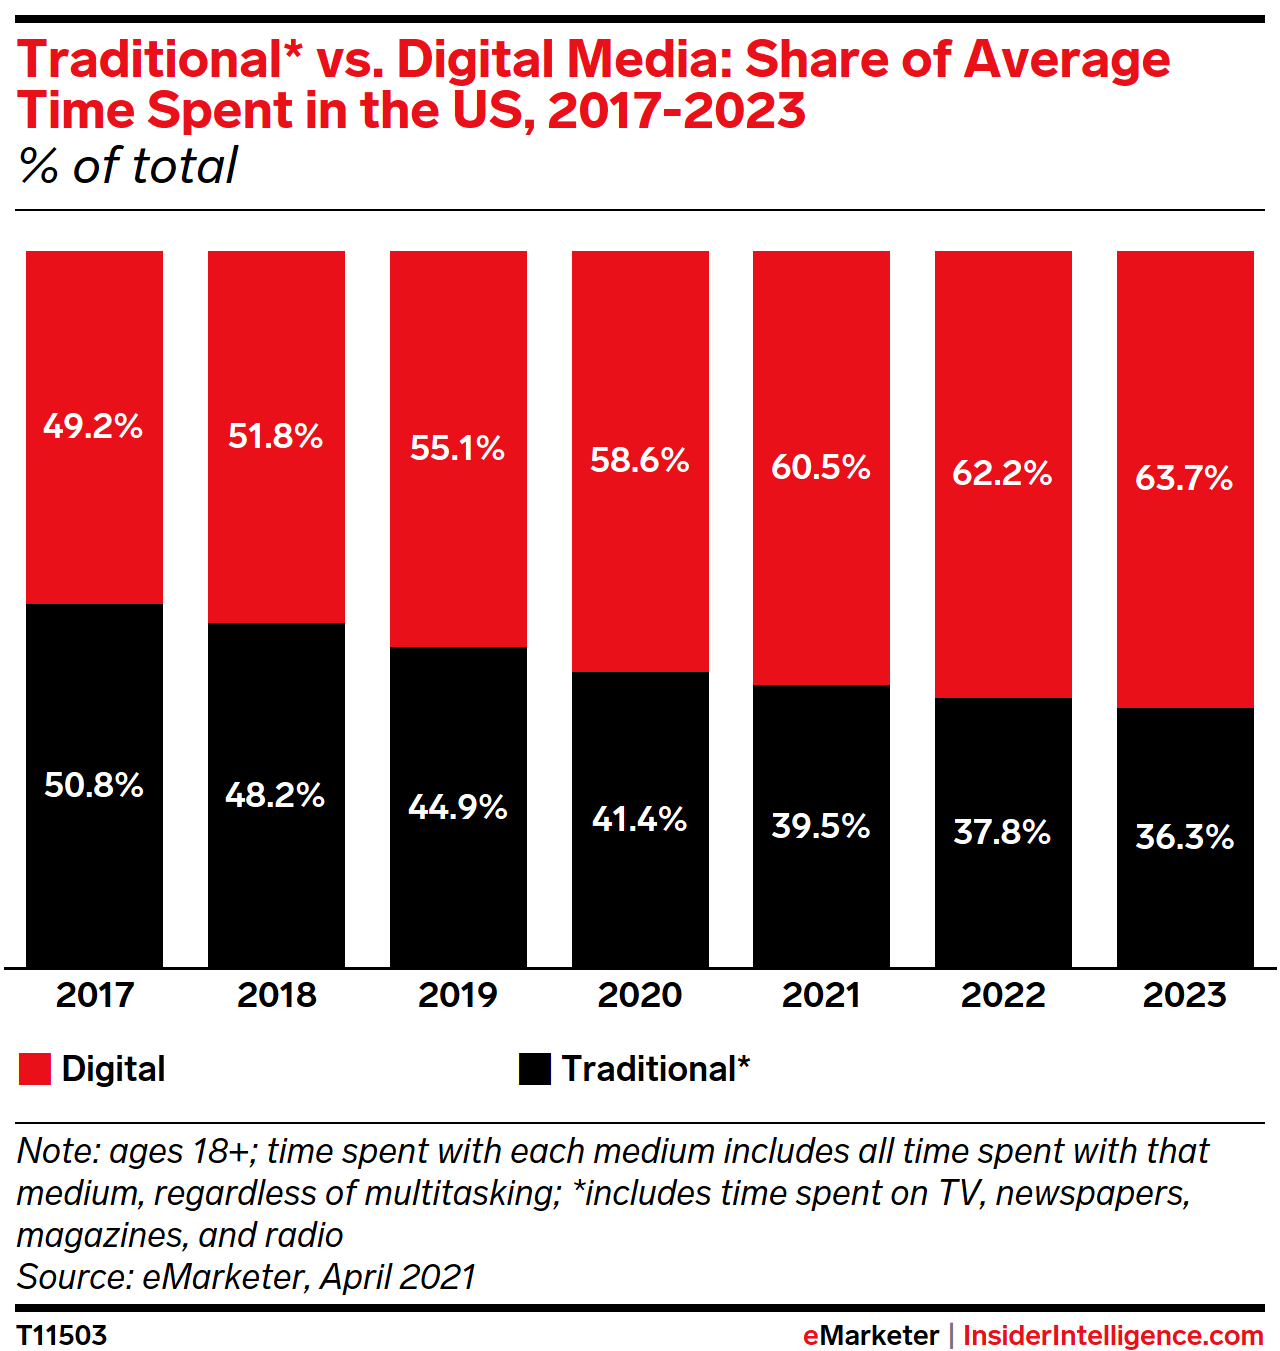 Traditional* vs. Digital Media: Share of Average Time Spent in the US, 2017-2023 (% of total)